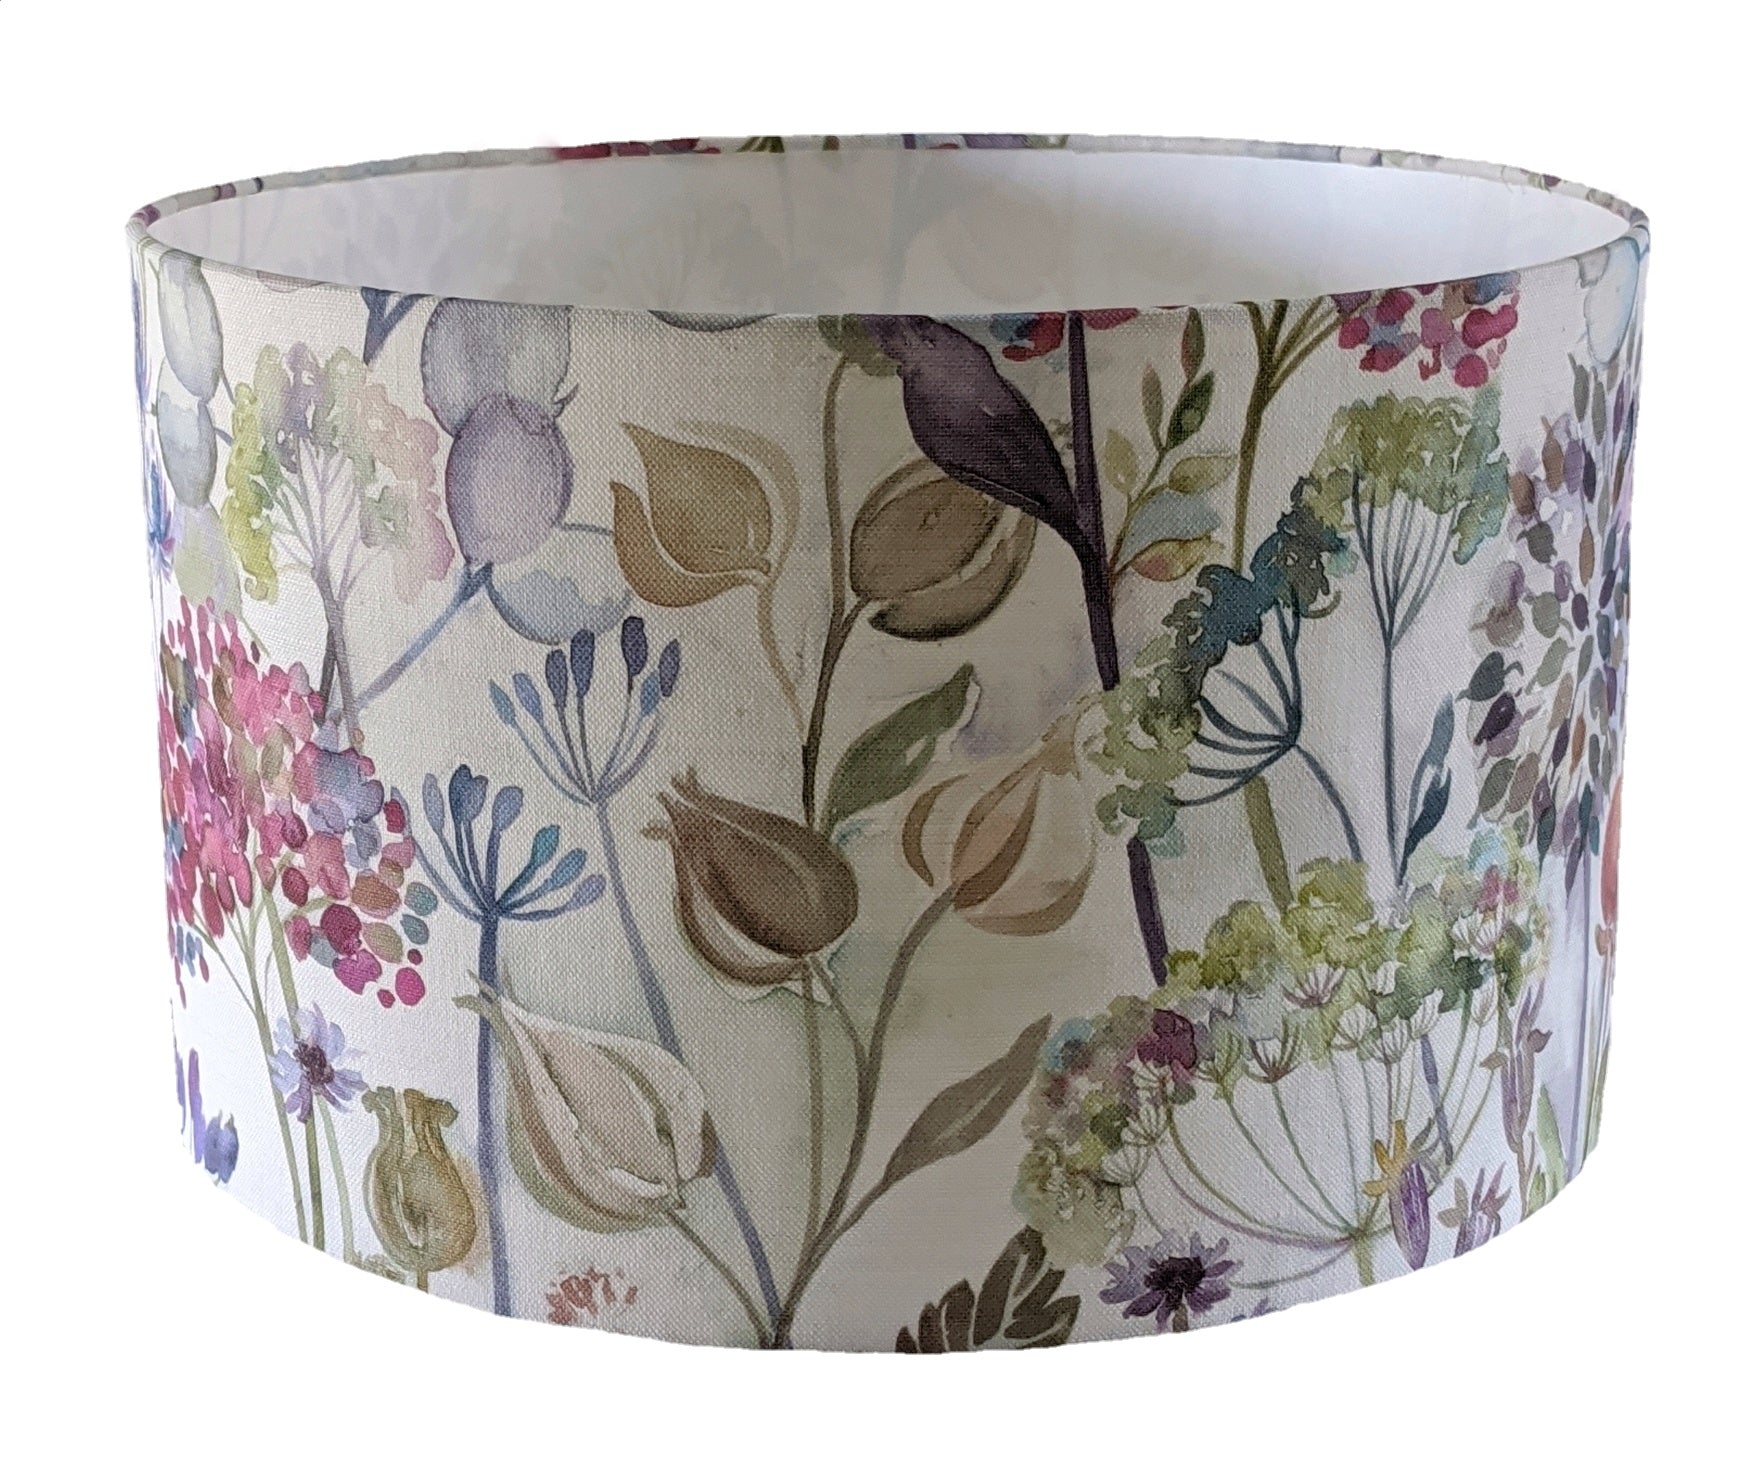 Voyage hedgerow cream lampshade for a lamp -  20cm, 30cm and 40cm